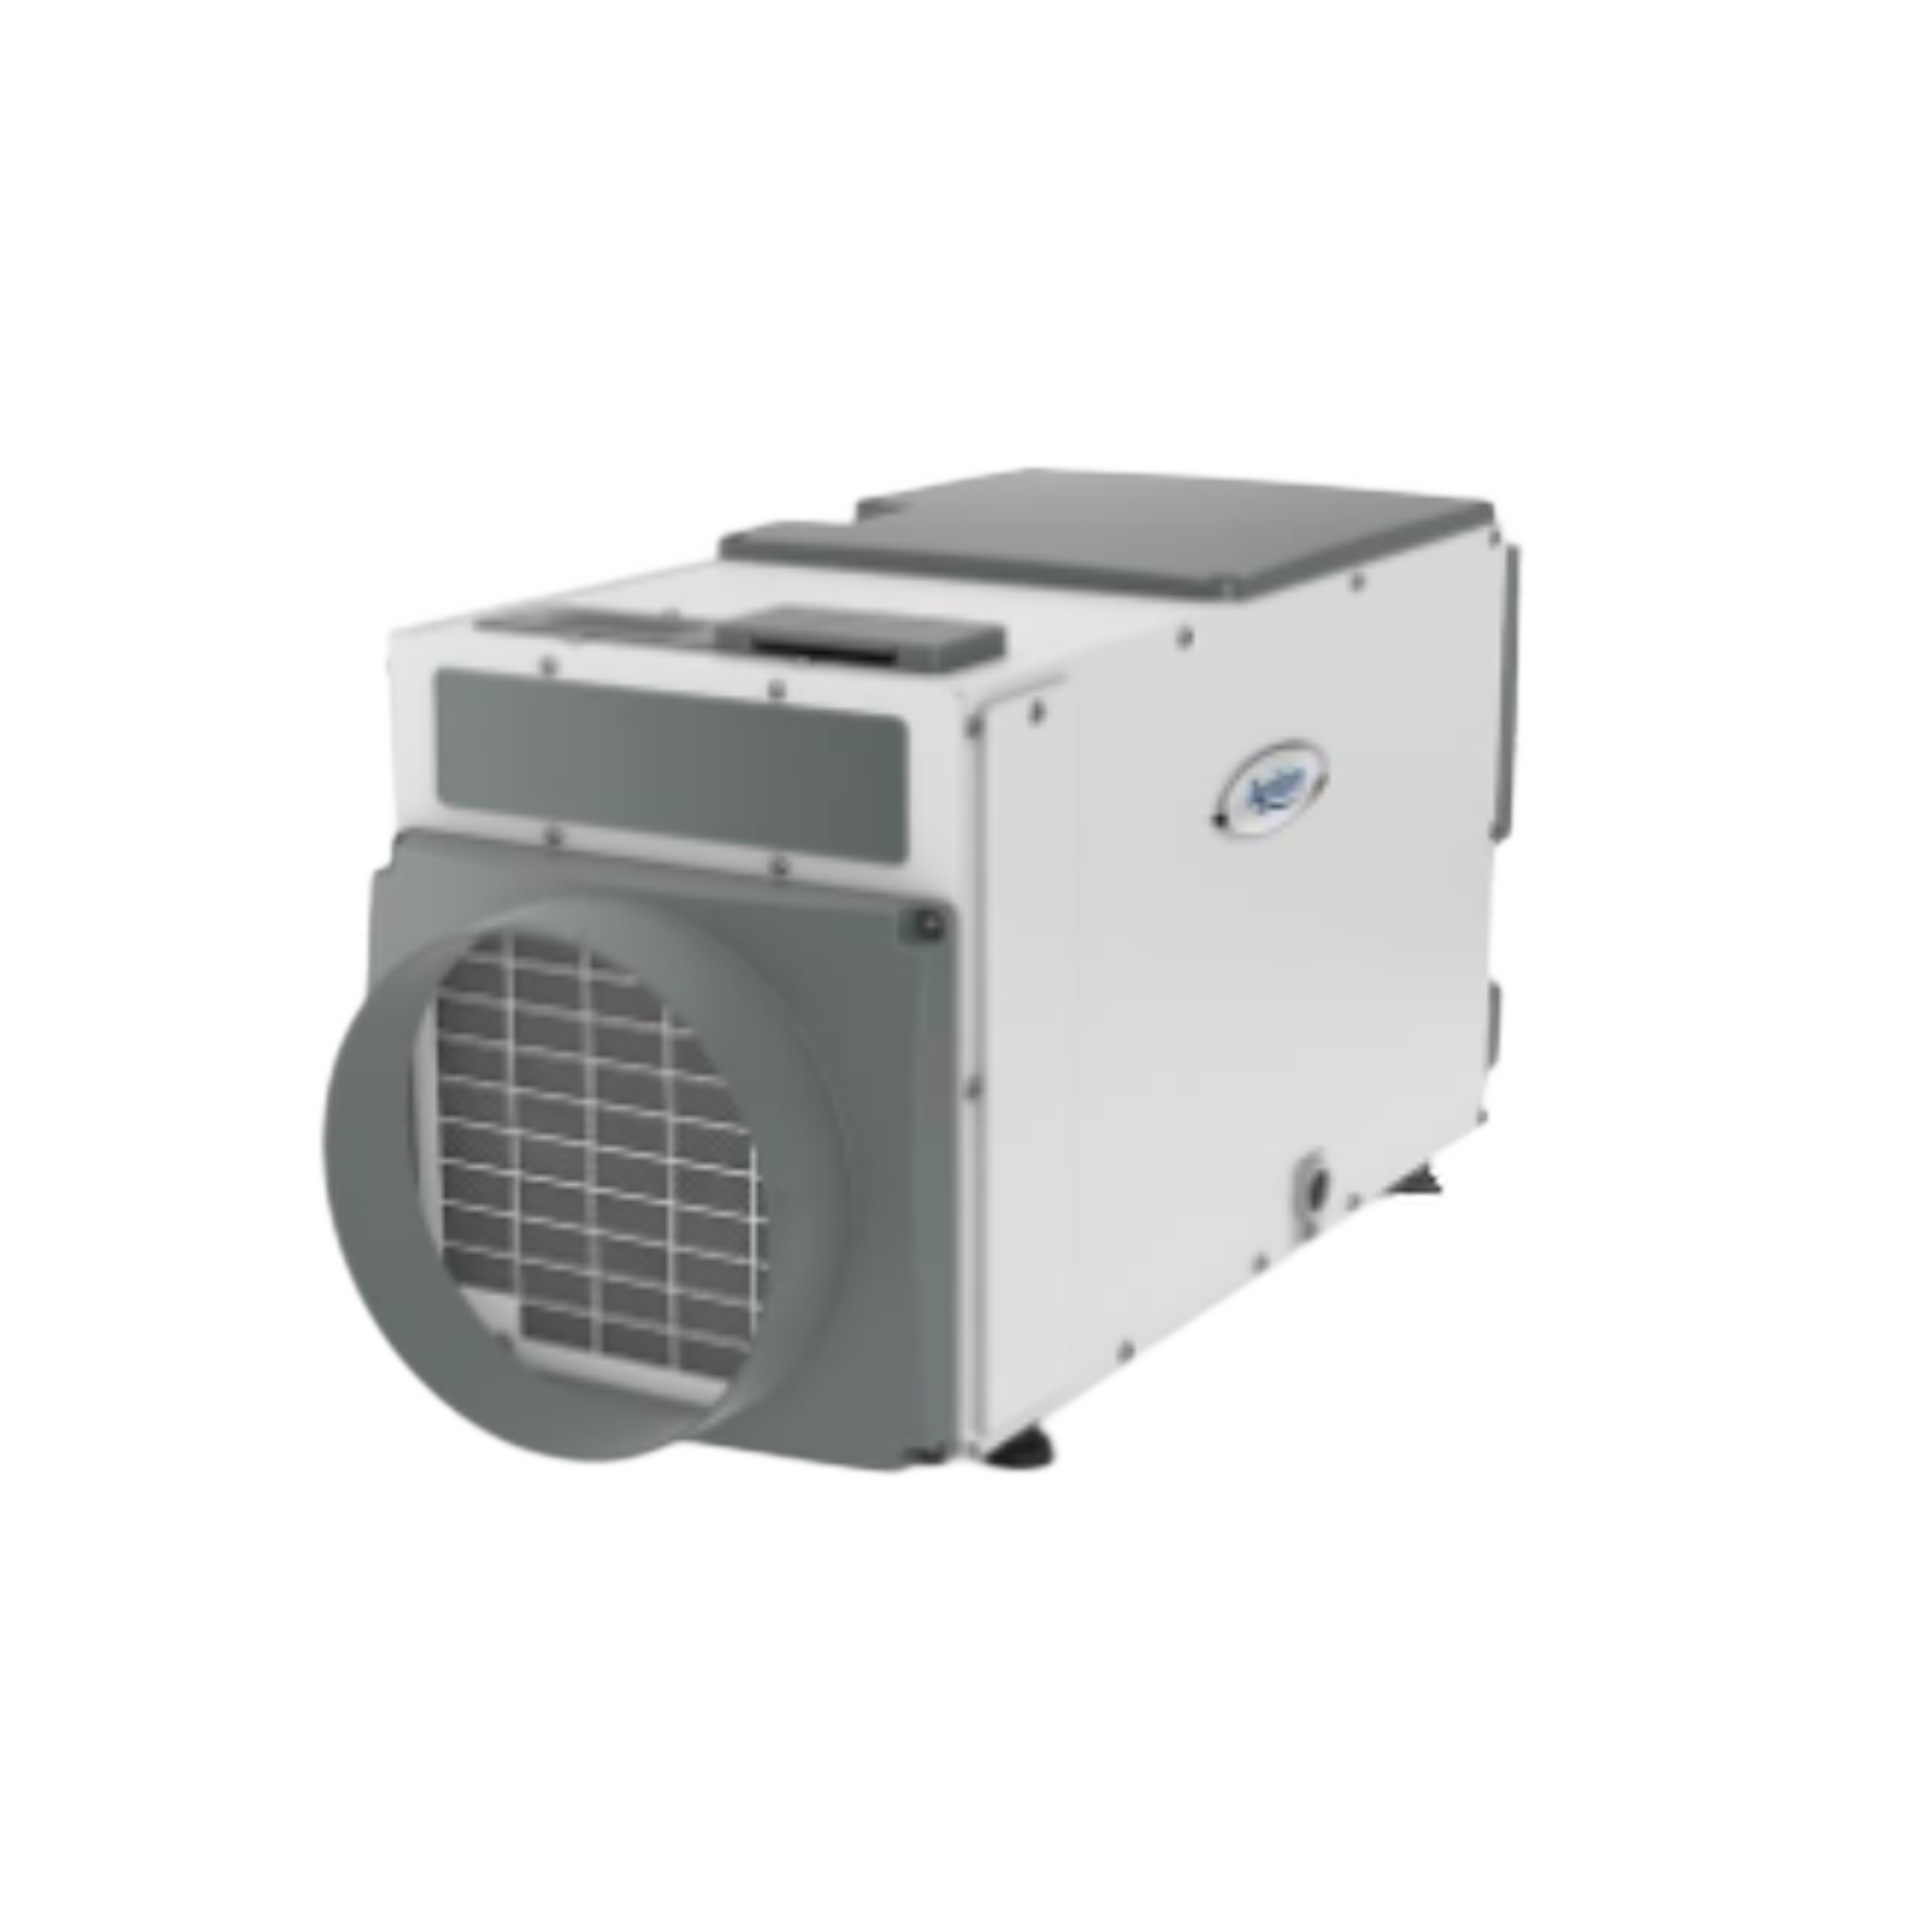 AprilAire Model 1830 Dehumidifier, upto 9 Gallons water removal/day